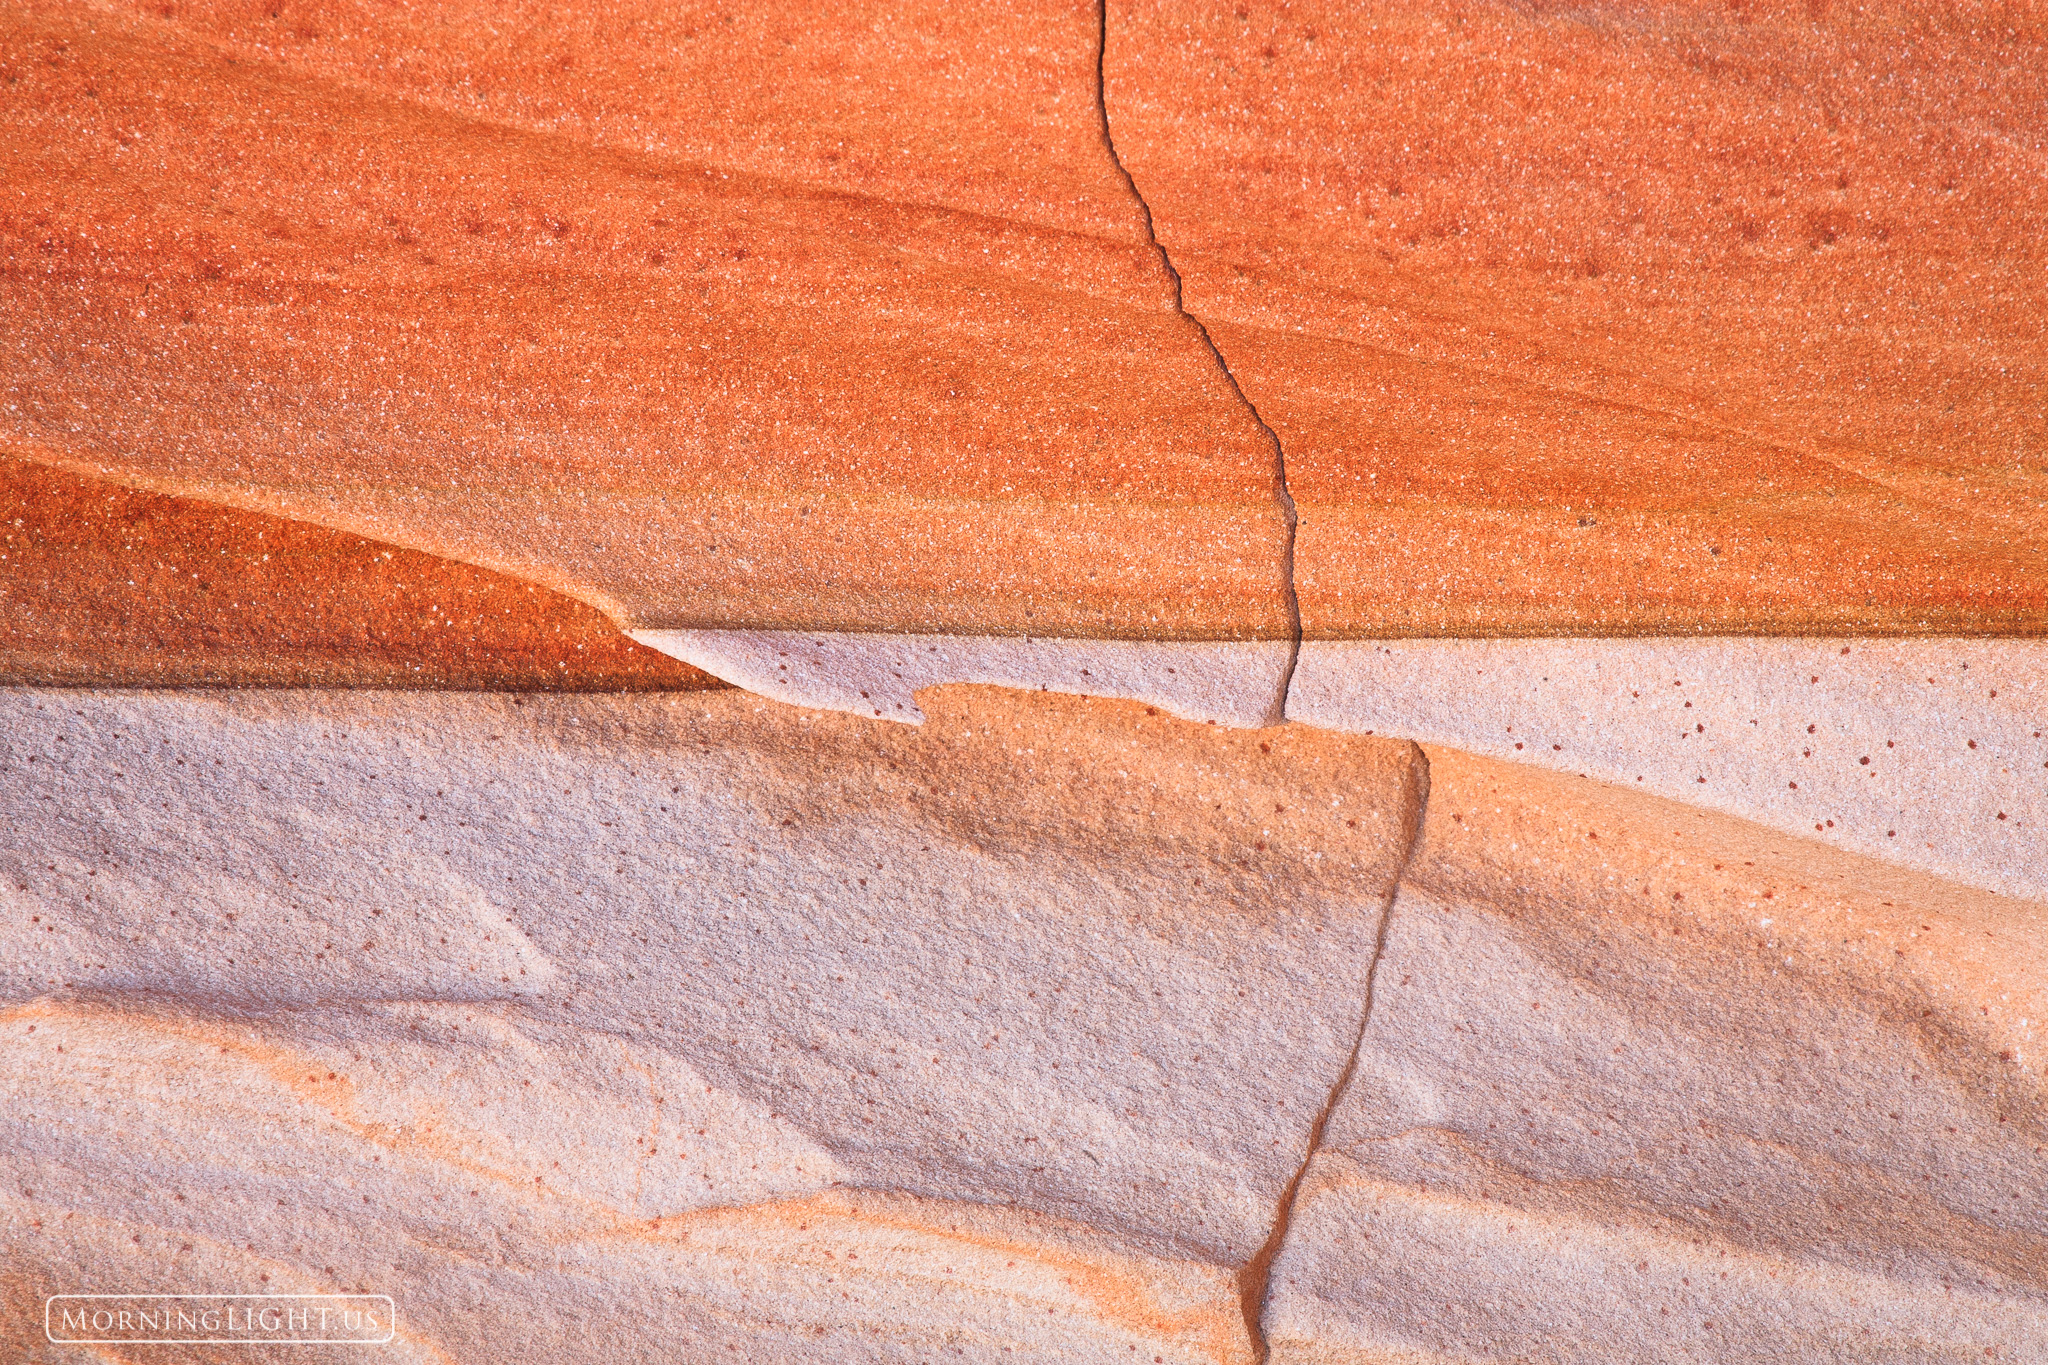 I've called this little sandstone abstract "Division". It is interesting to see these two colors of sandstone sharply divided...